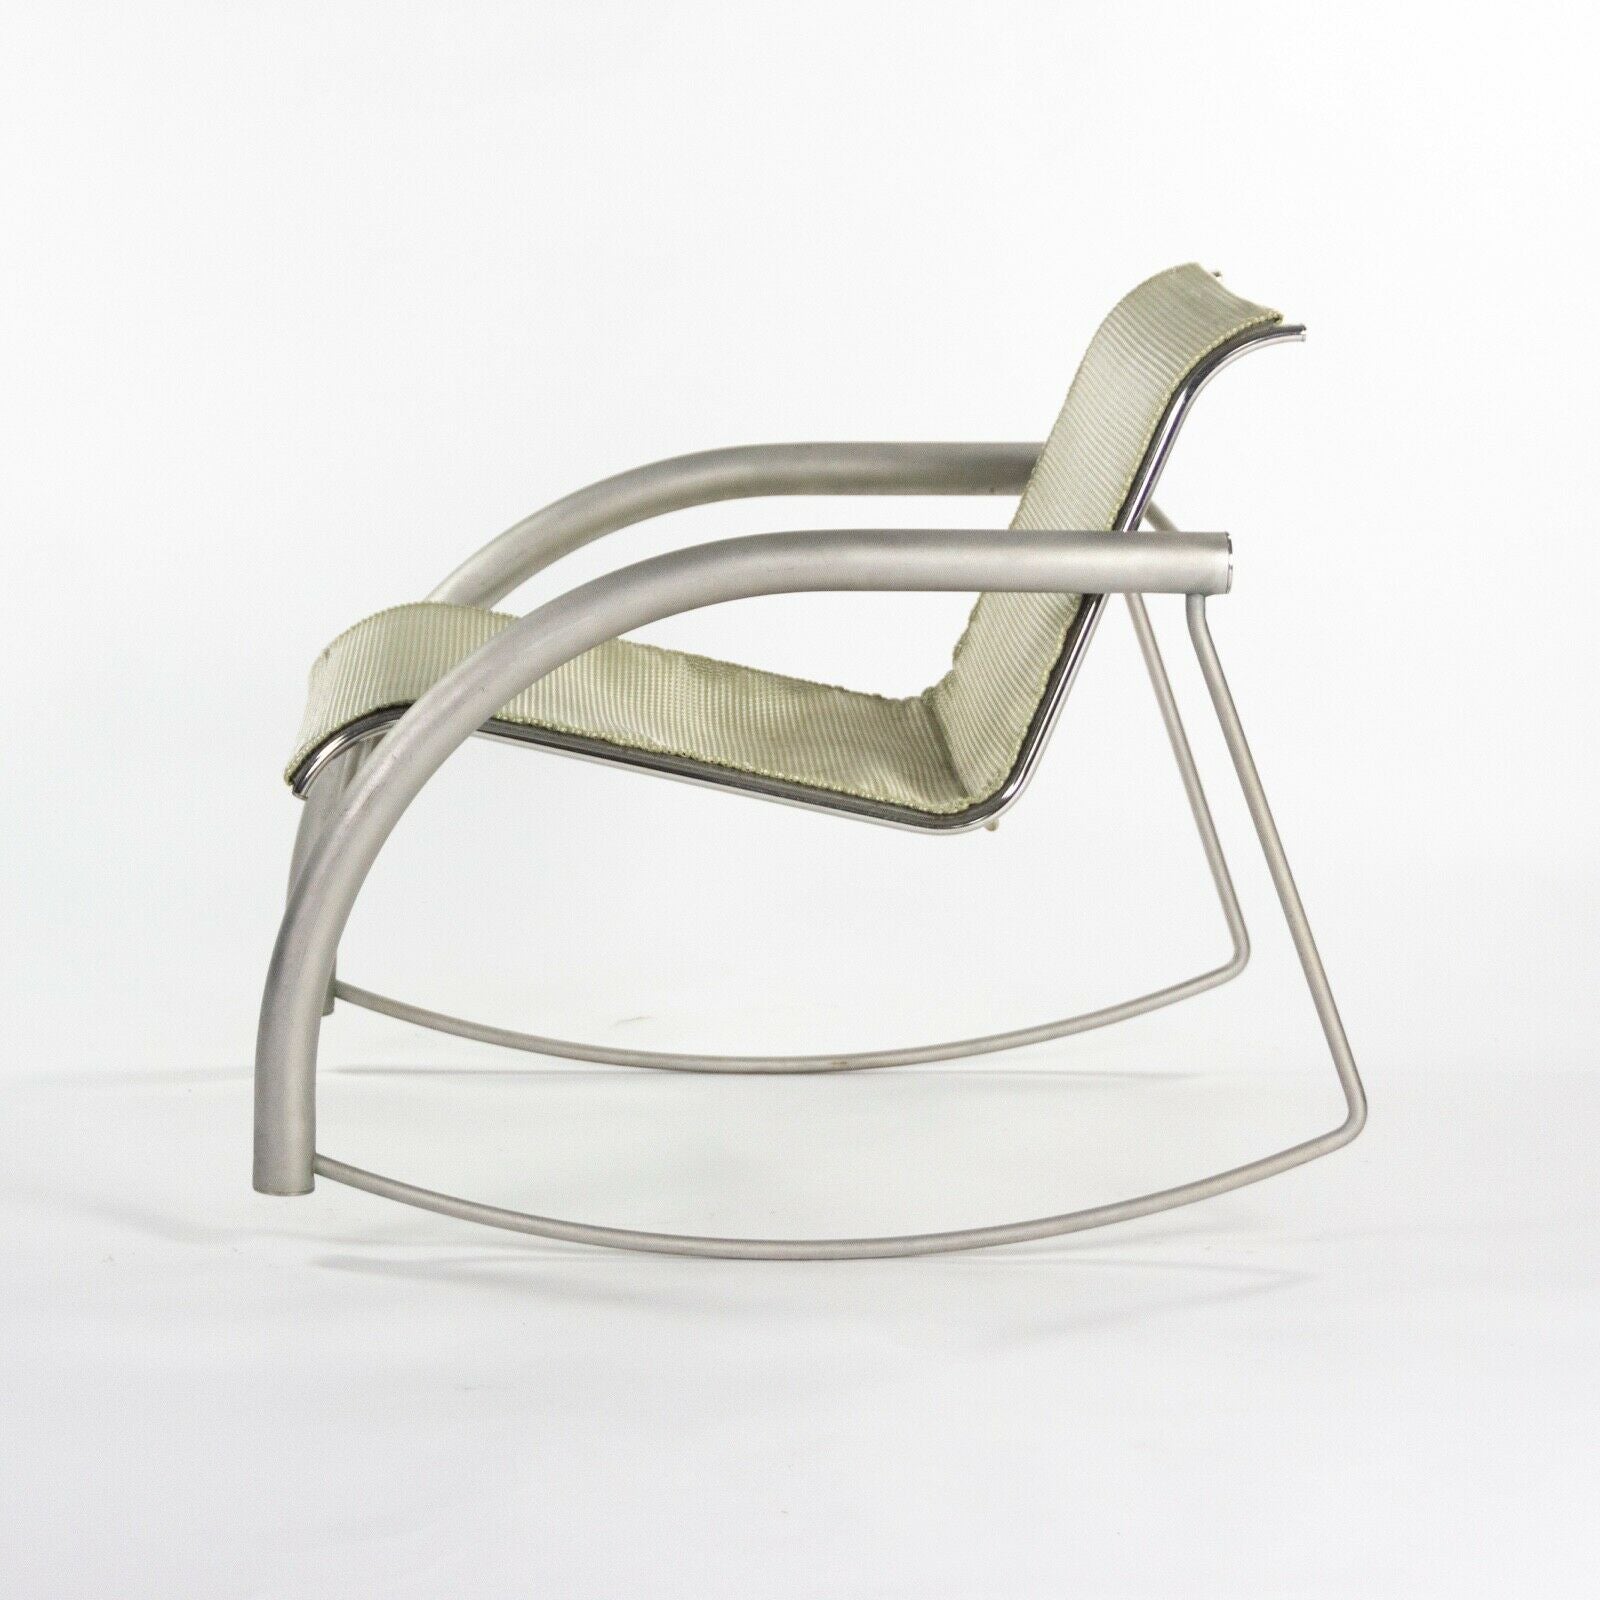 Prototype Richard Schultz 2002 Collection Stainless Steel & Mesh Rocking Chair